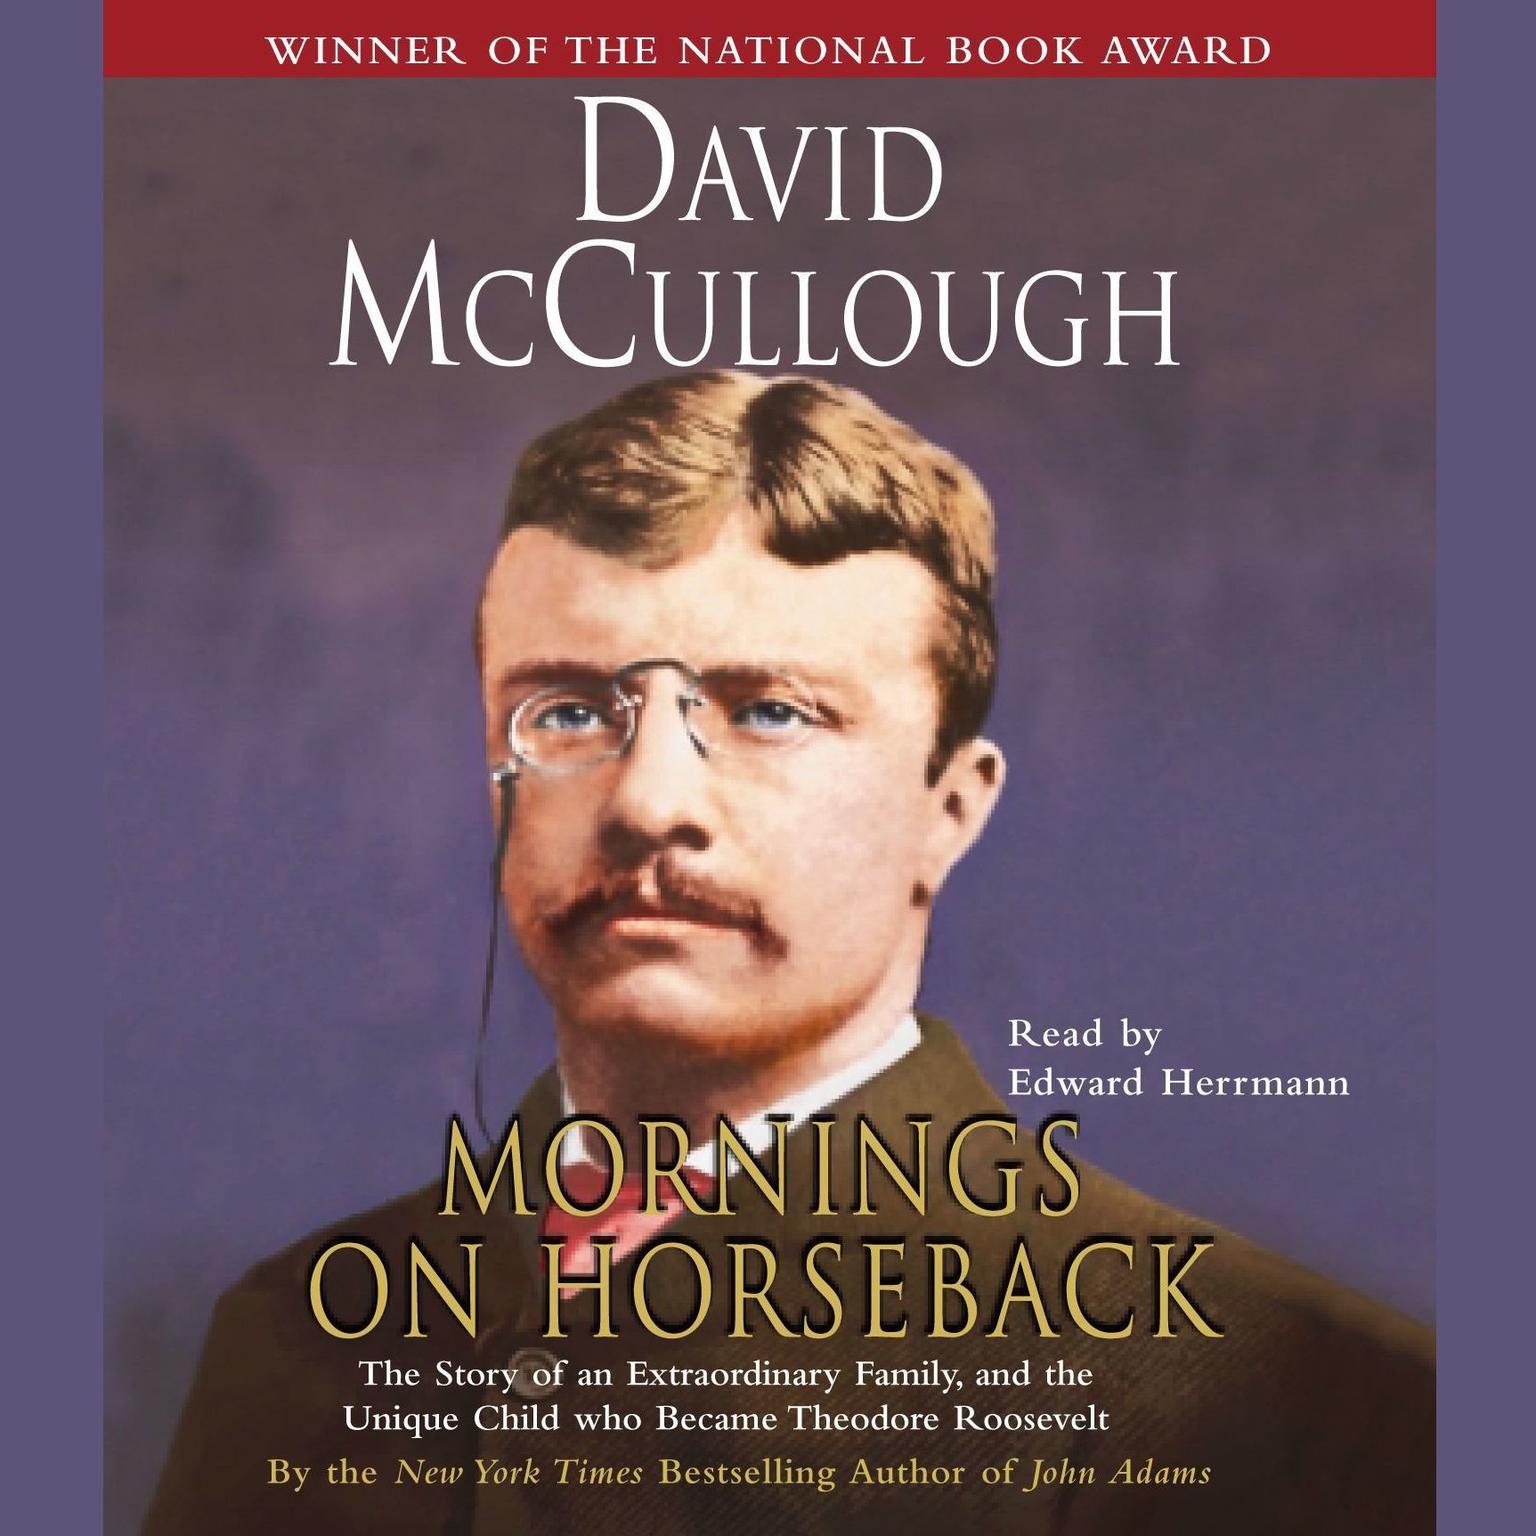 Mornings On Horseback (Abridged): The Story of an Extraordinary Family, a Vanished Way of Life, and the Unique Child Who Became Theodore Roosevelt Audiobook, by David McCullough